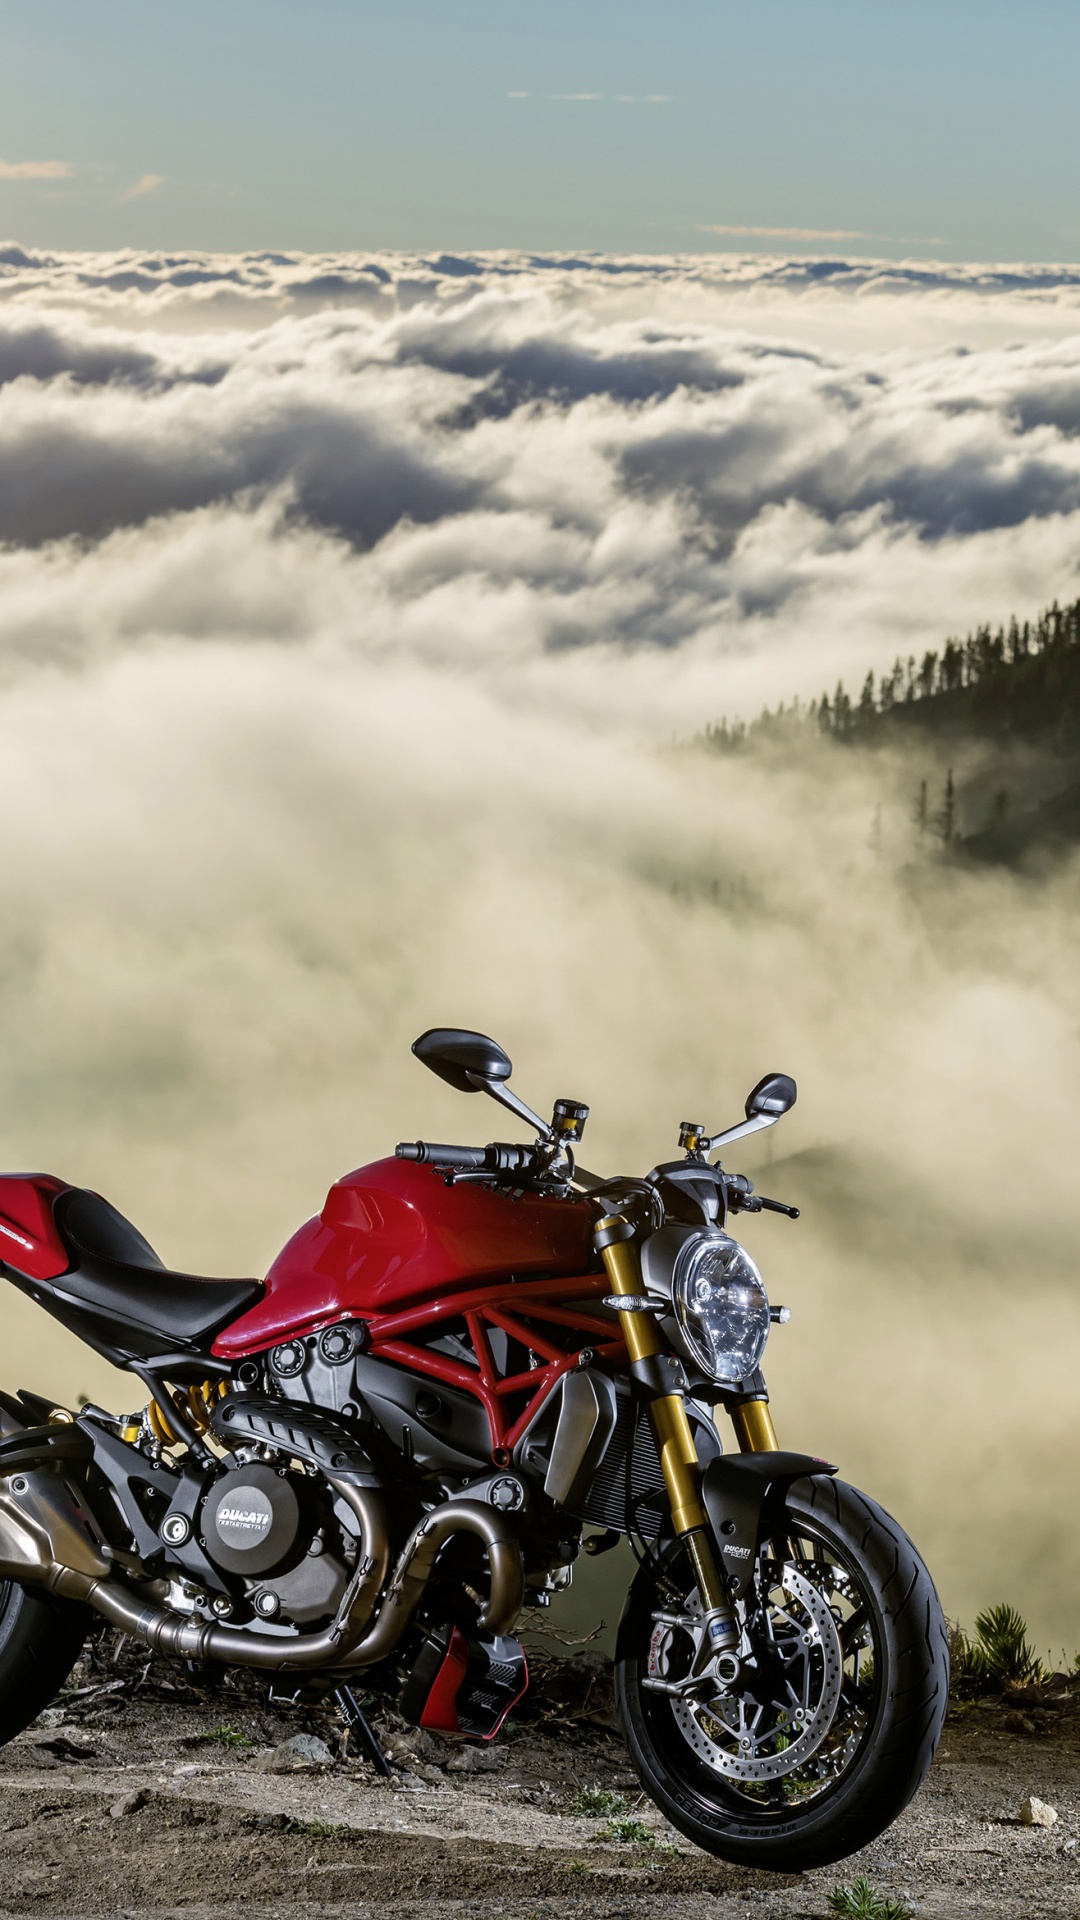 Red and Black Sports Bike on Brown Field Under White Clouds During Daytime. Wallpaper in 1080x1920 Resolution